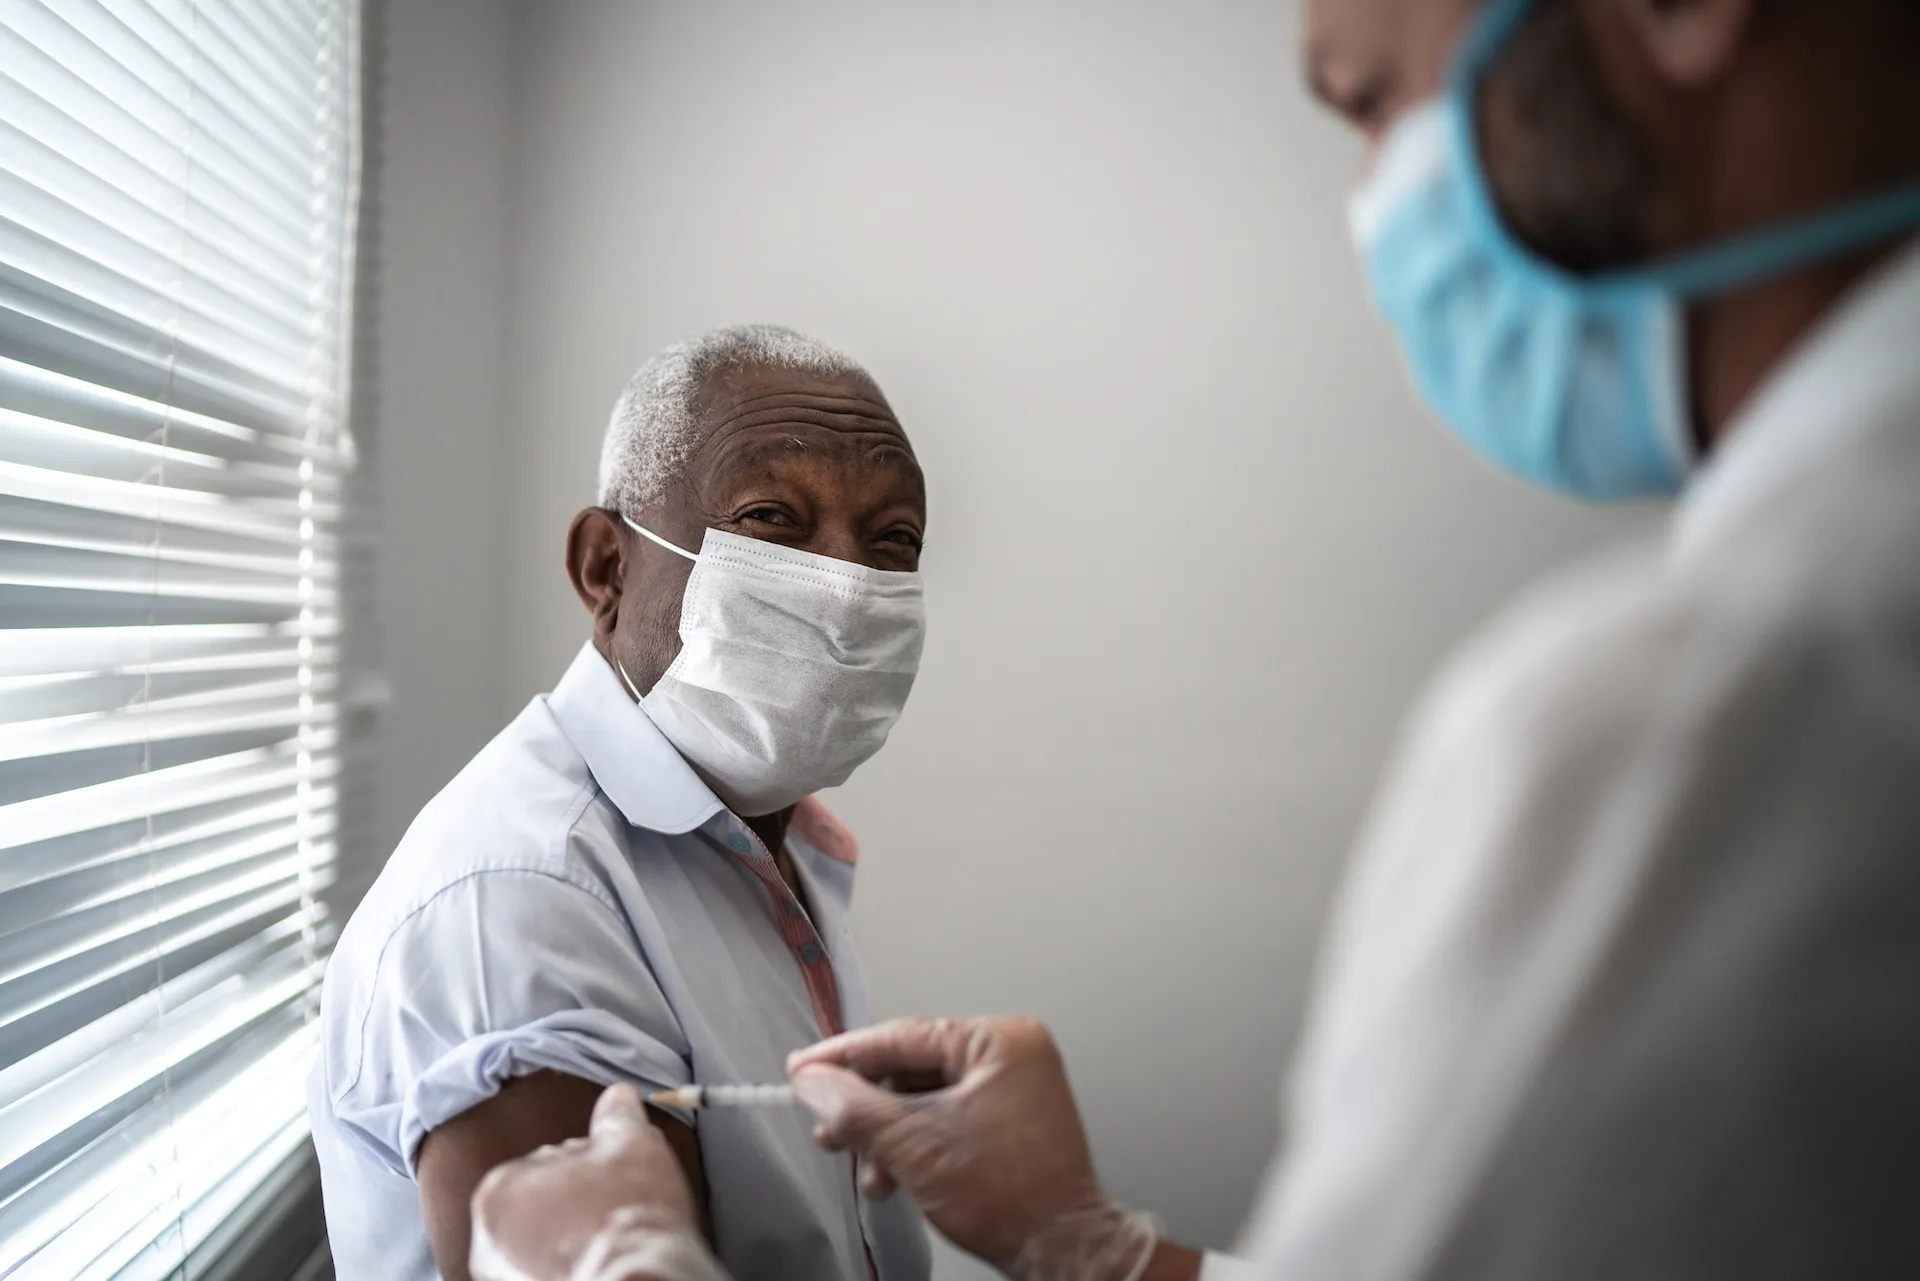 Flublok vaccine improved protection from flu for older adults